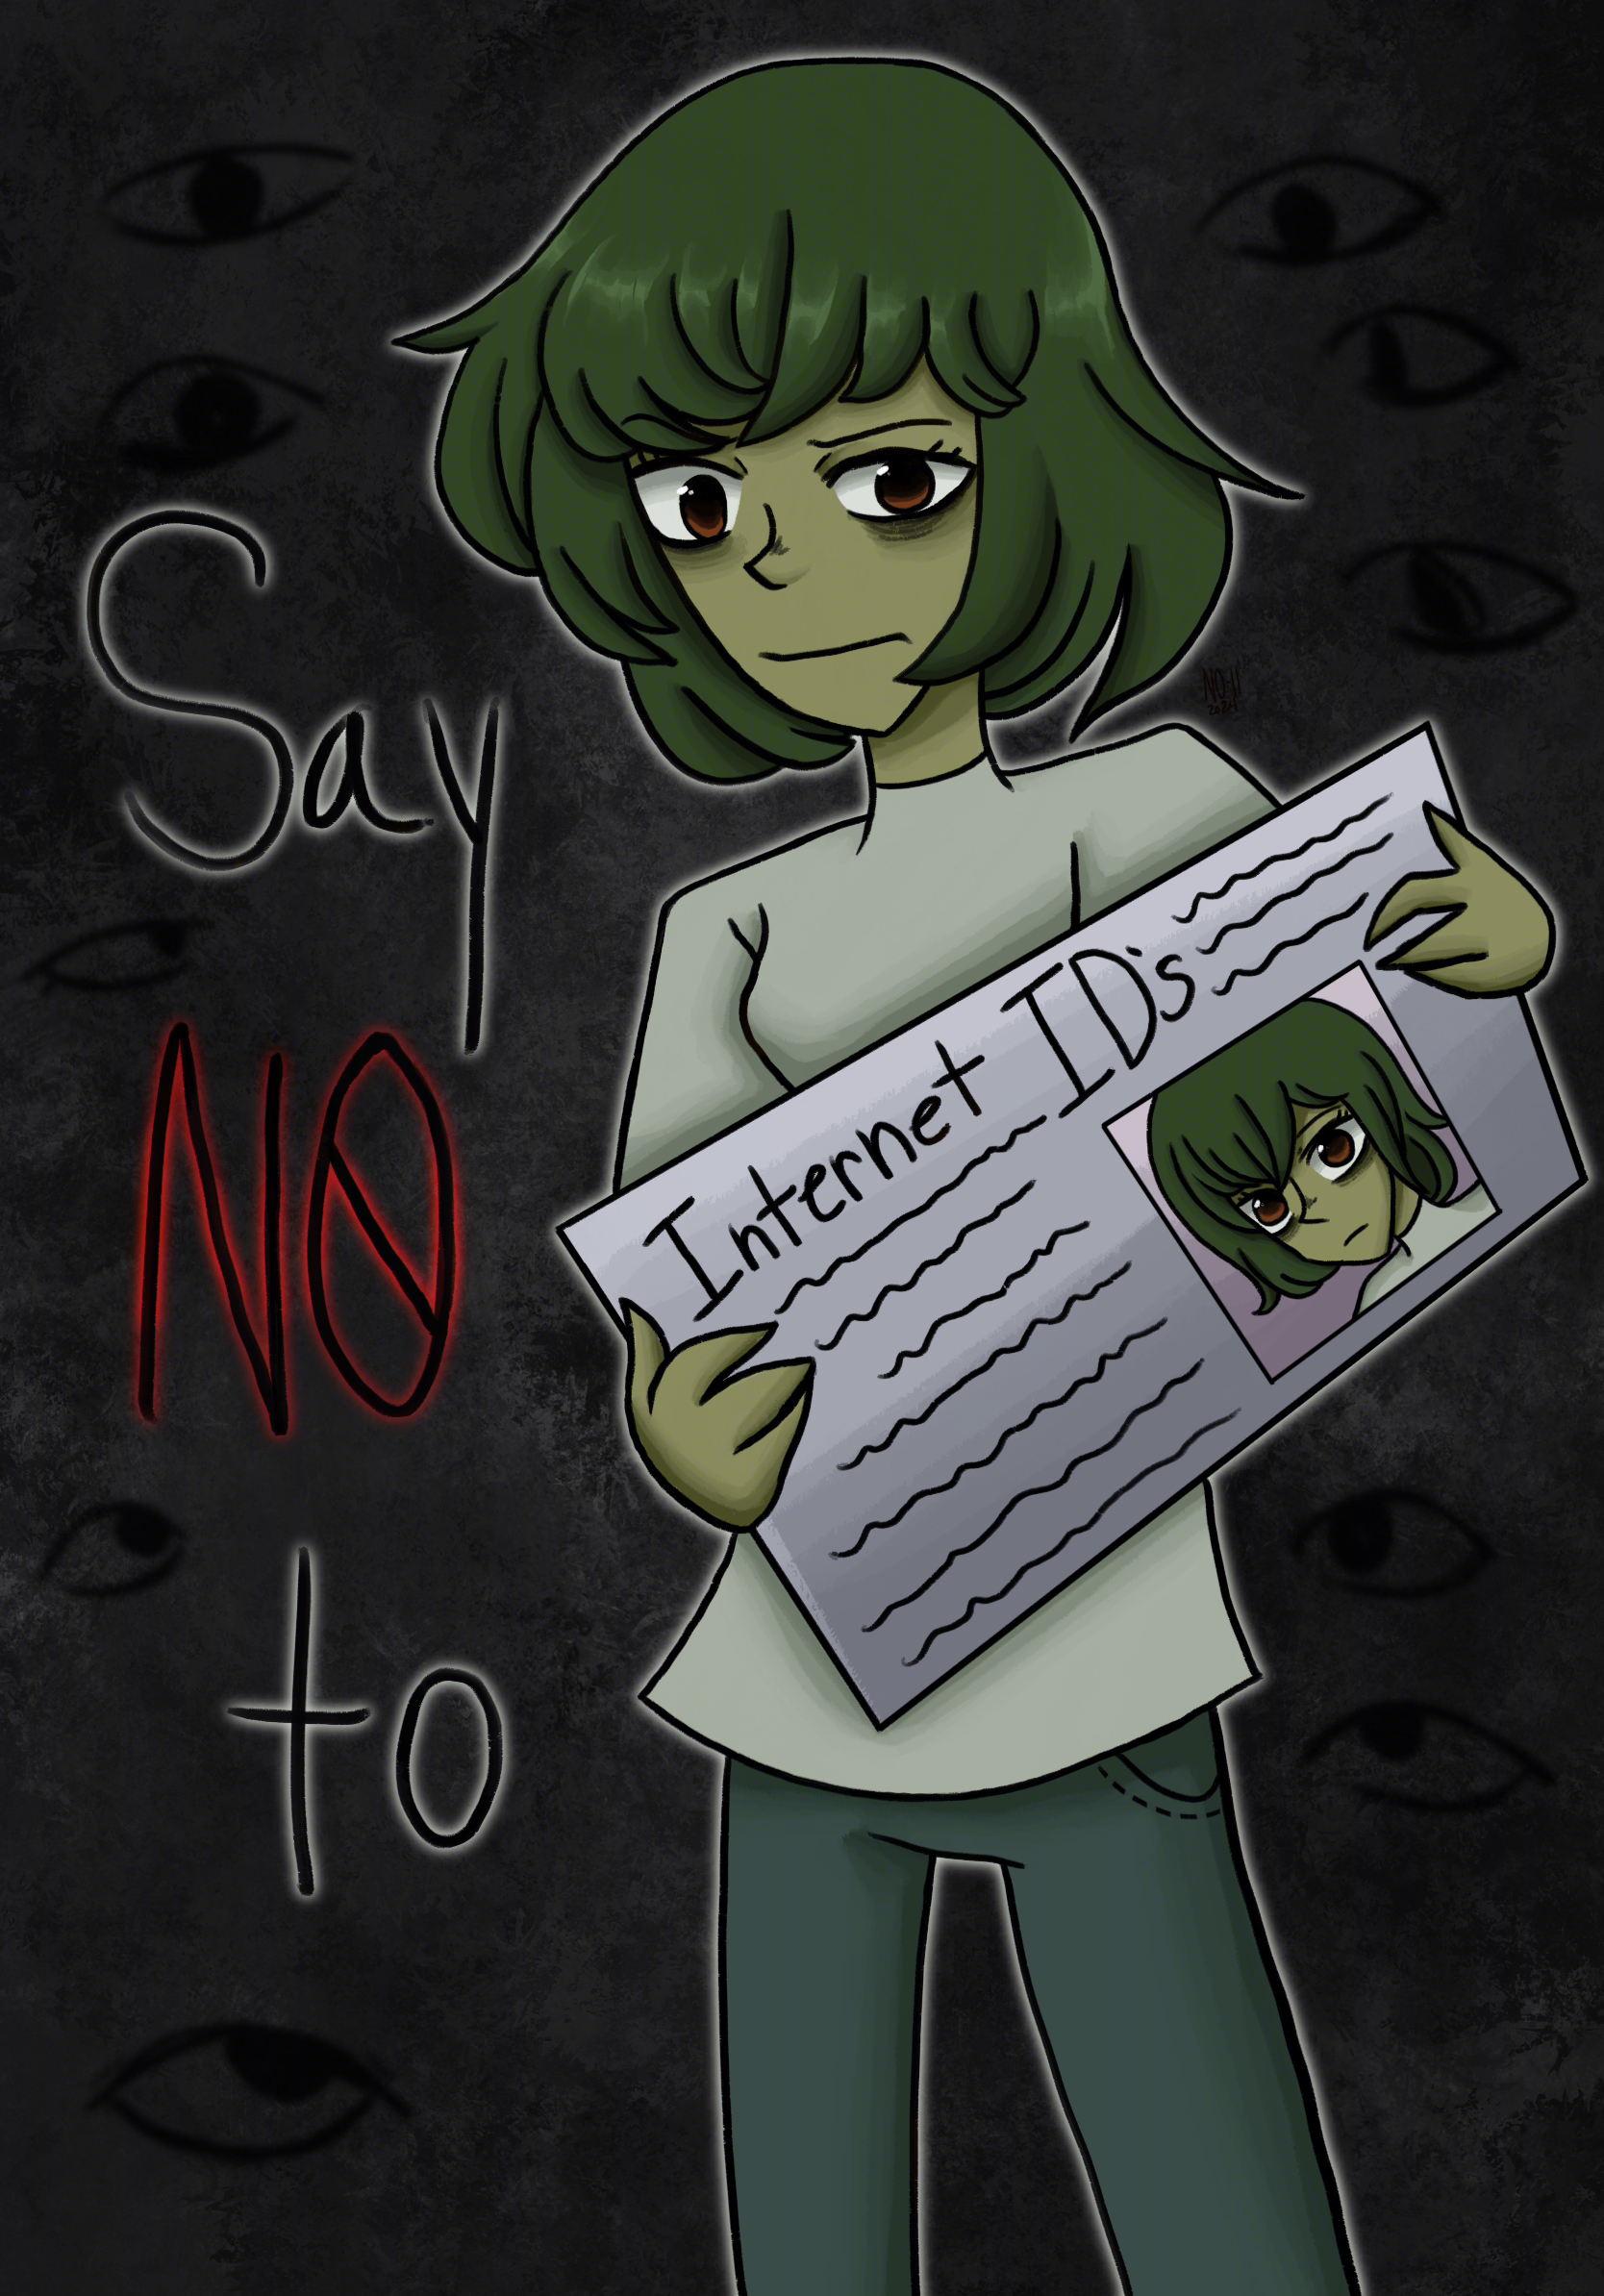 Say NO to Internet IDs